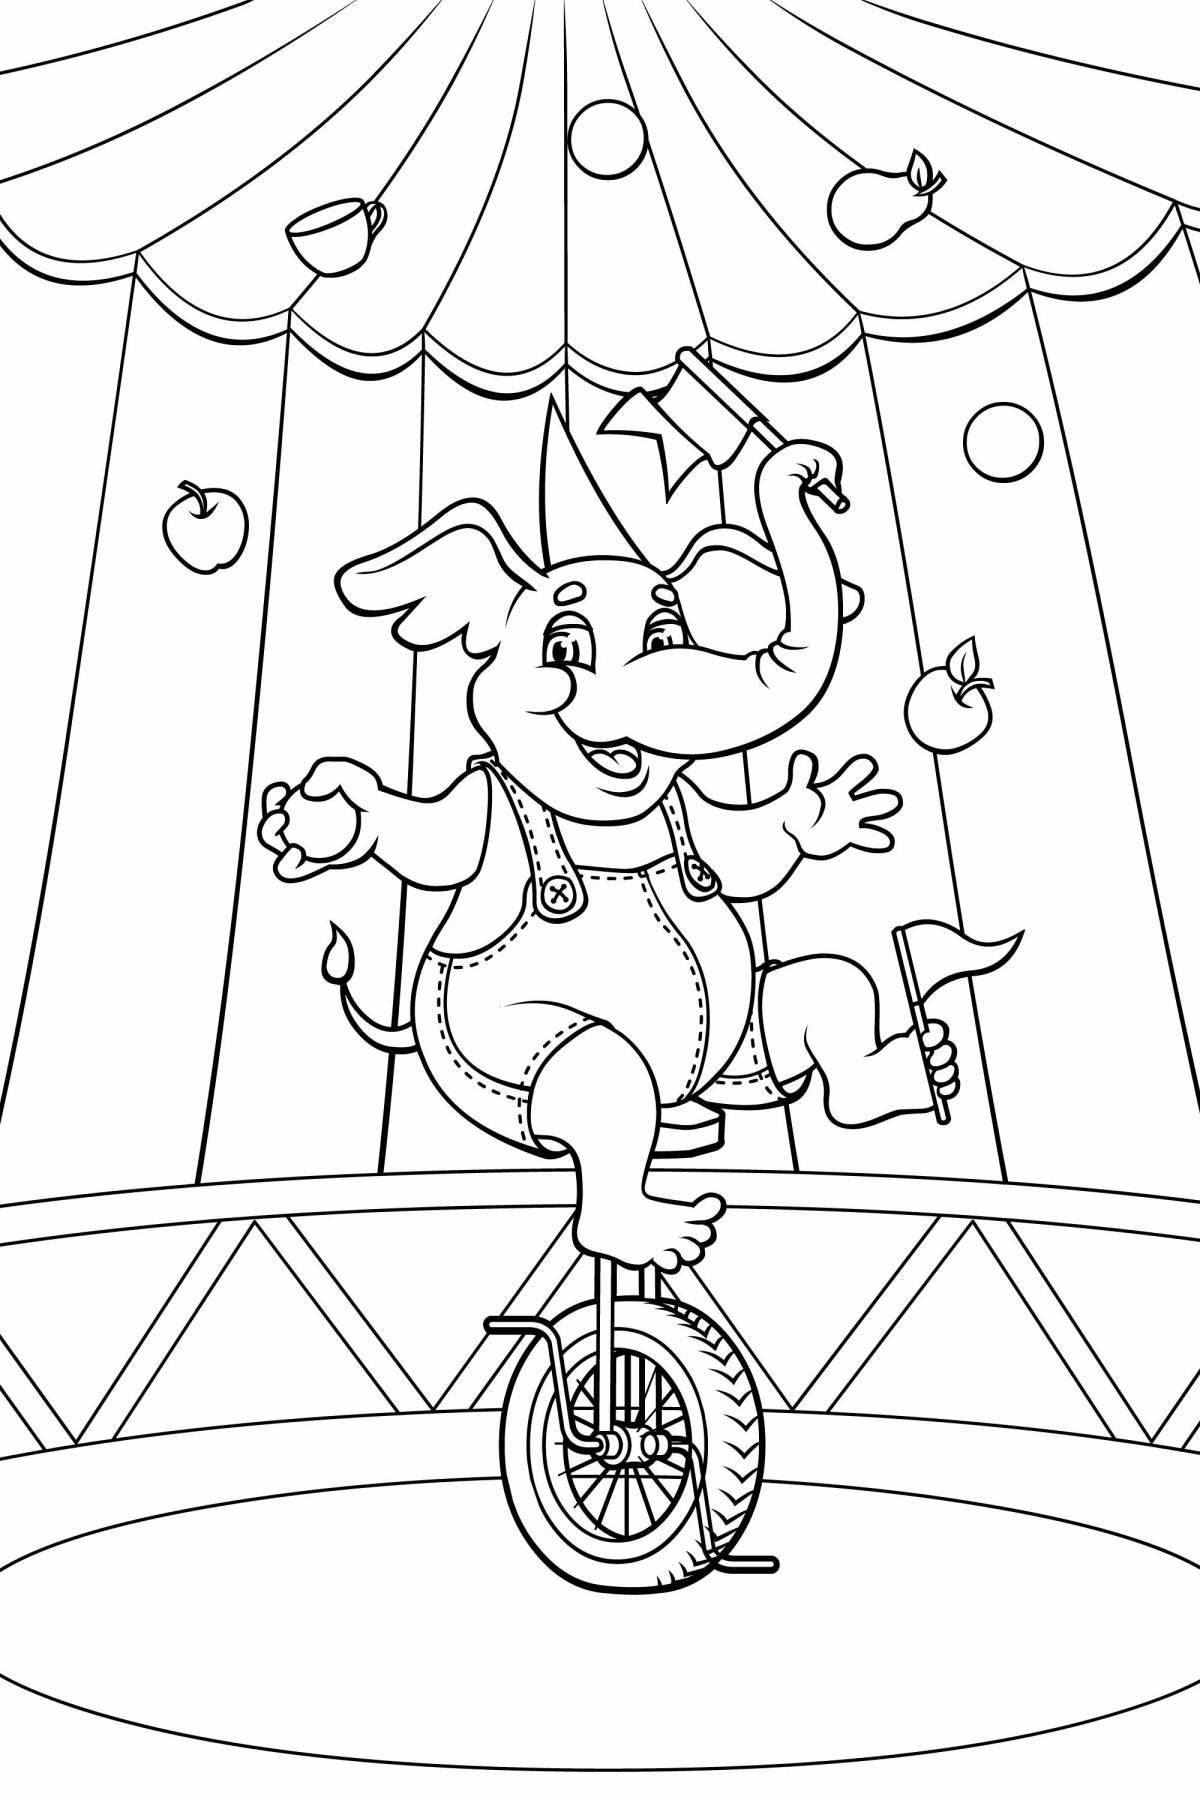 Coloring page bright circus performer